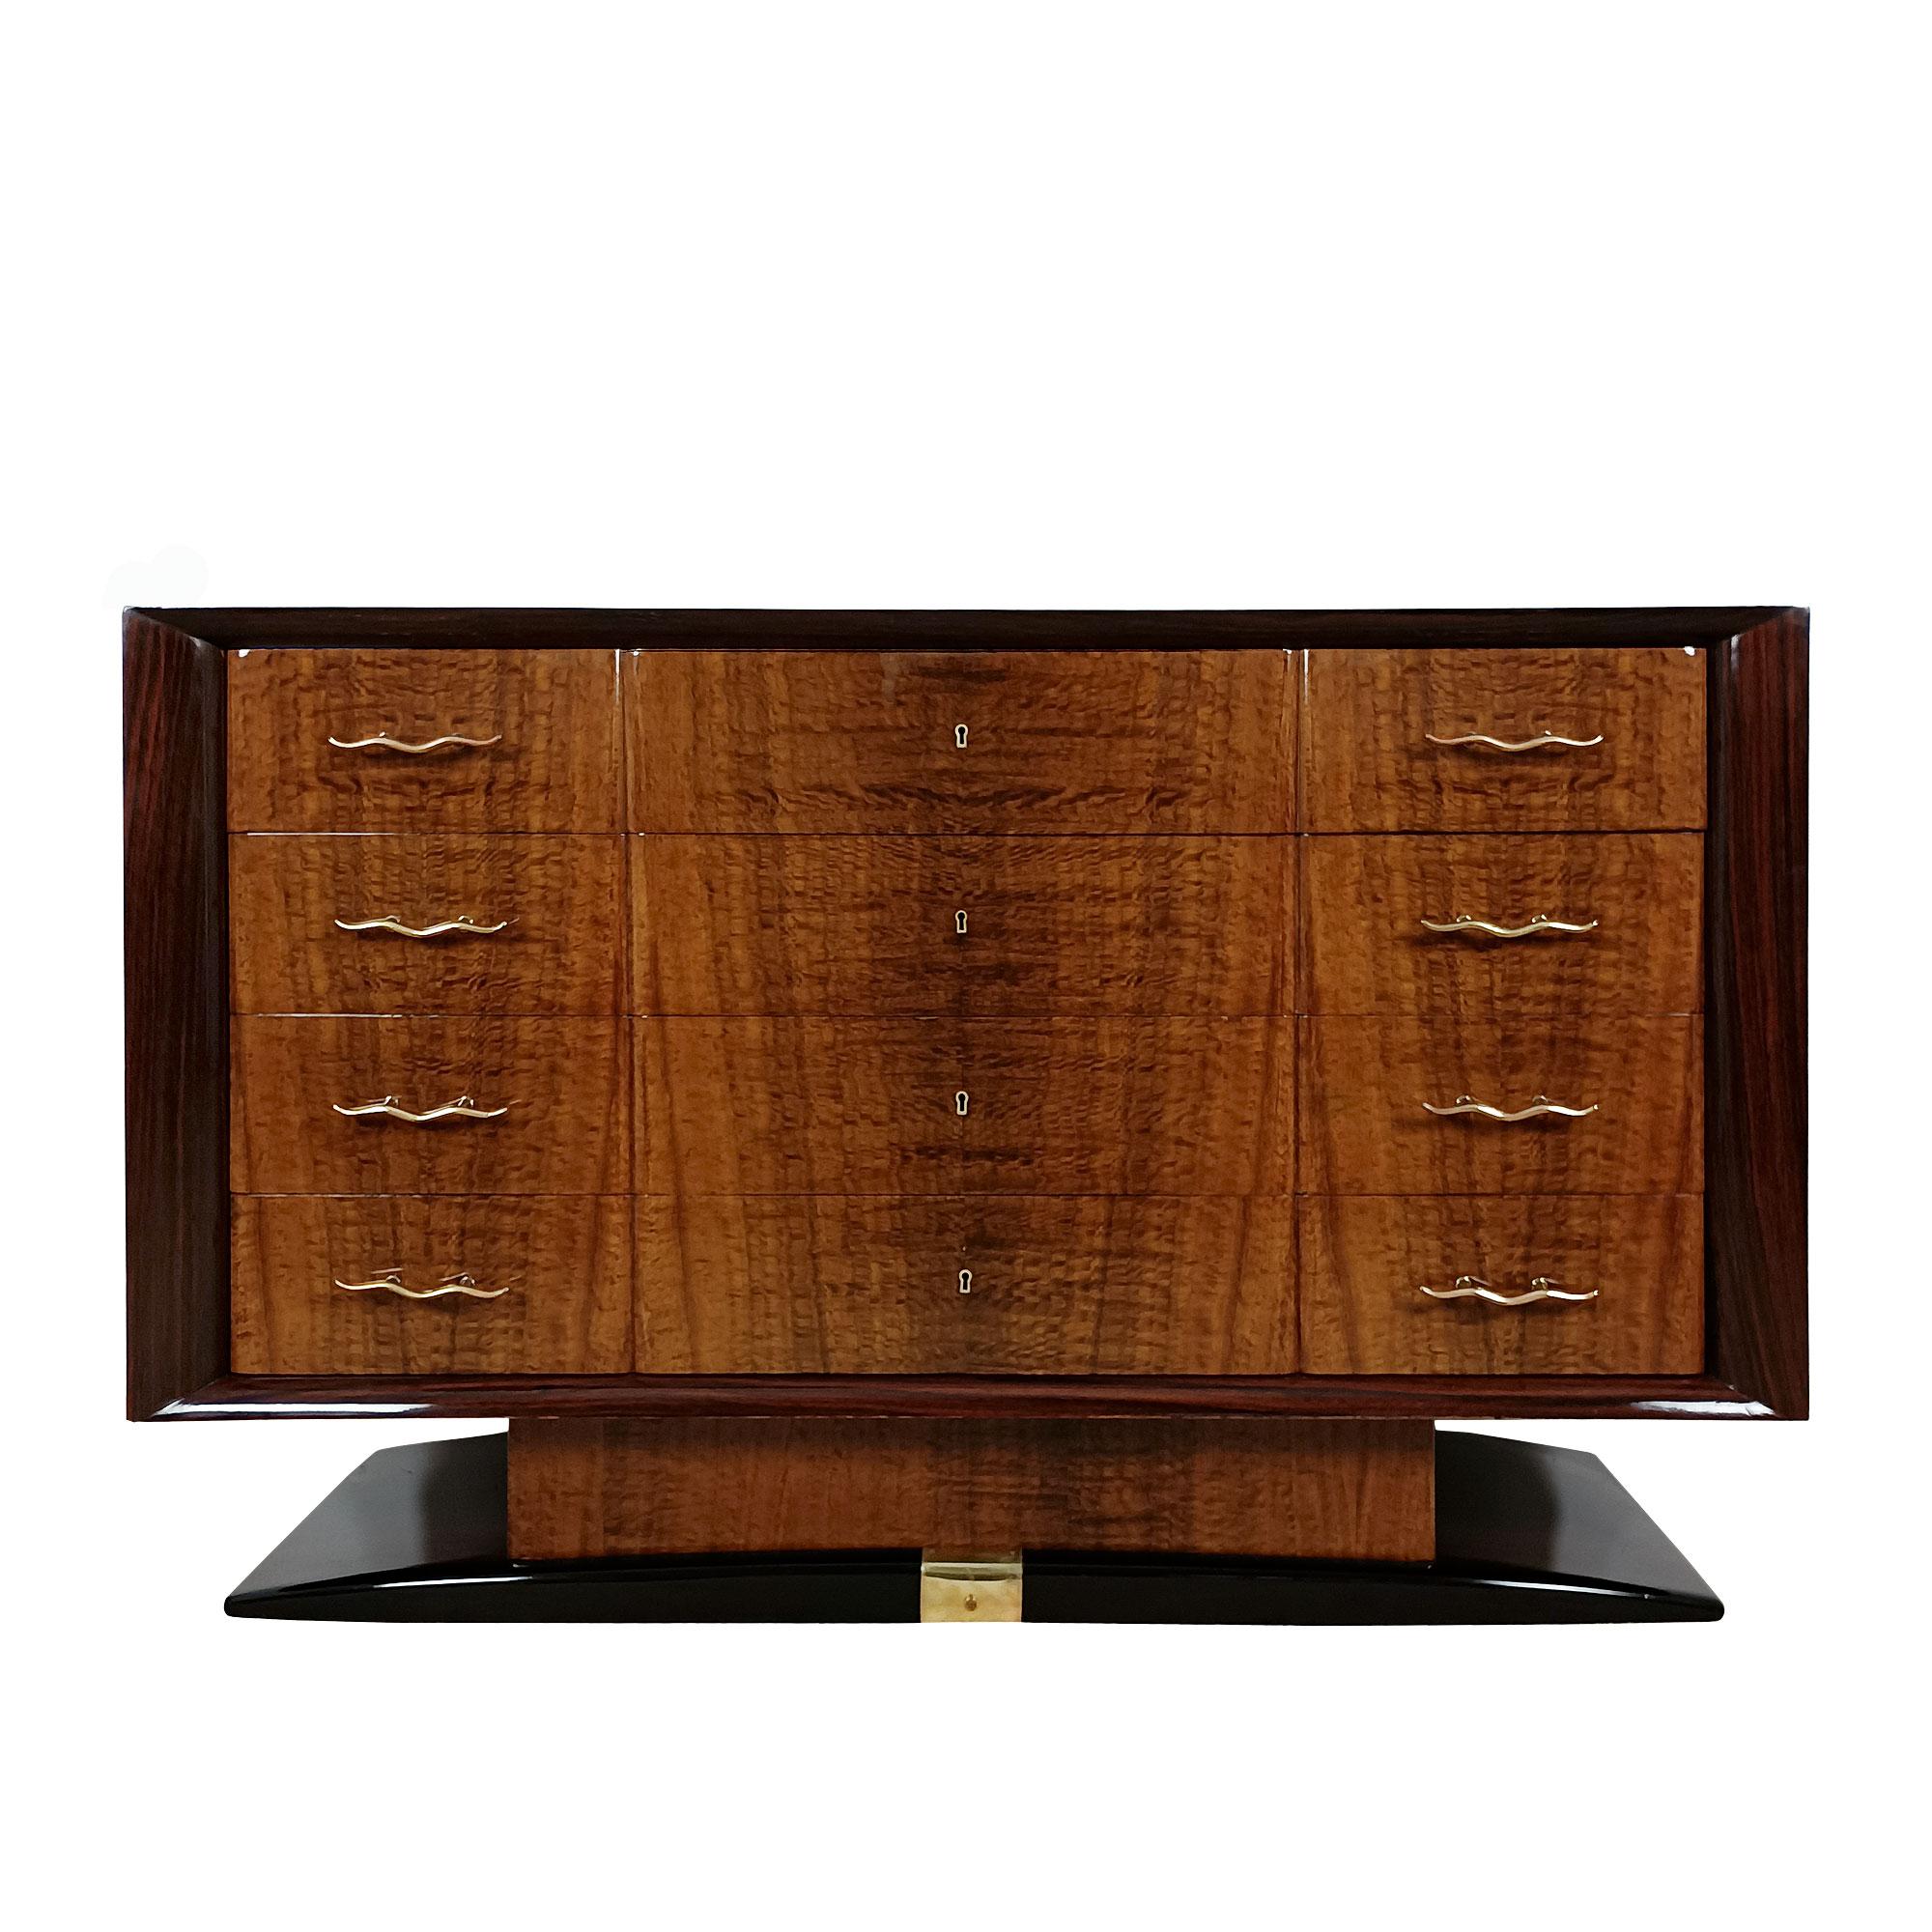 Spectacular large Art Deco chest of drawers in wood with rosewood veneer for the body and base, and burl mahogany for the drawer fronts (made of solid oak) and the foot. French polish. Polished brass handles and base decoration.
Italy circa 1930